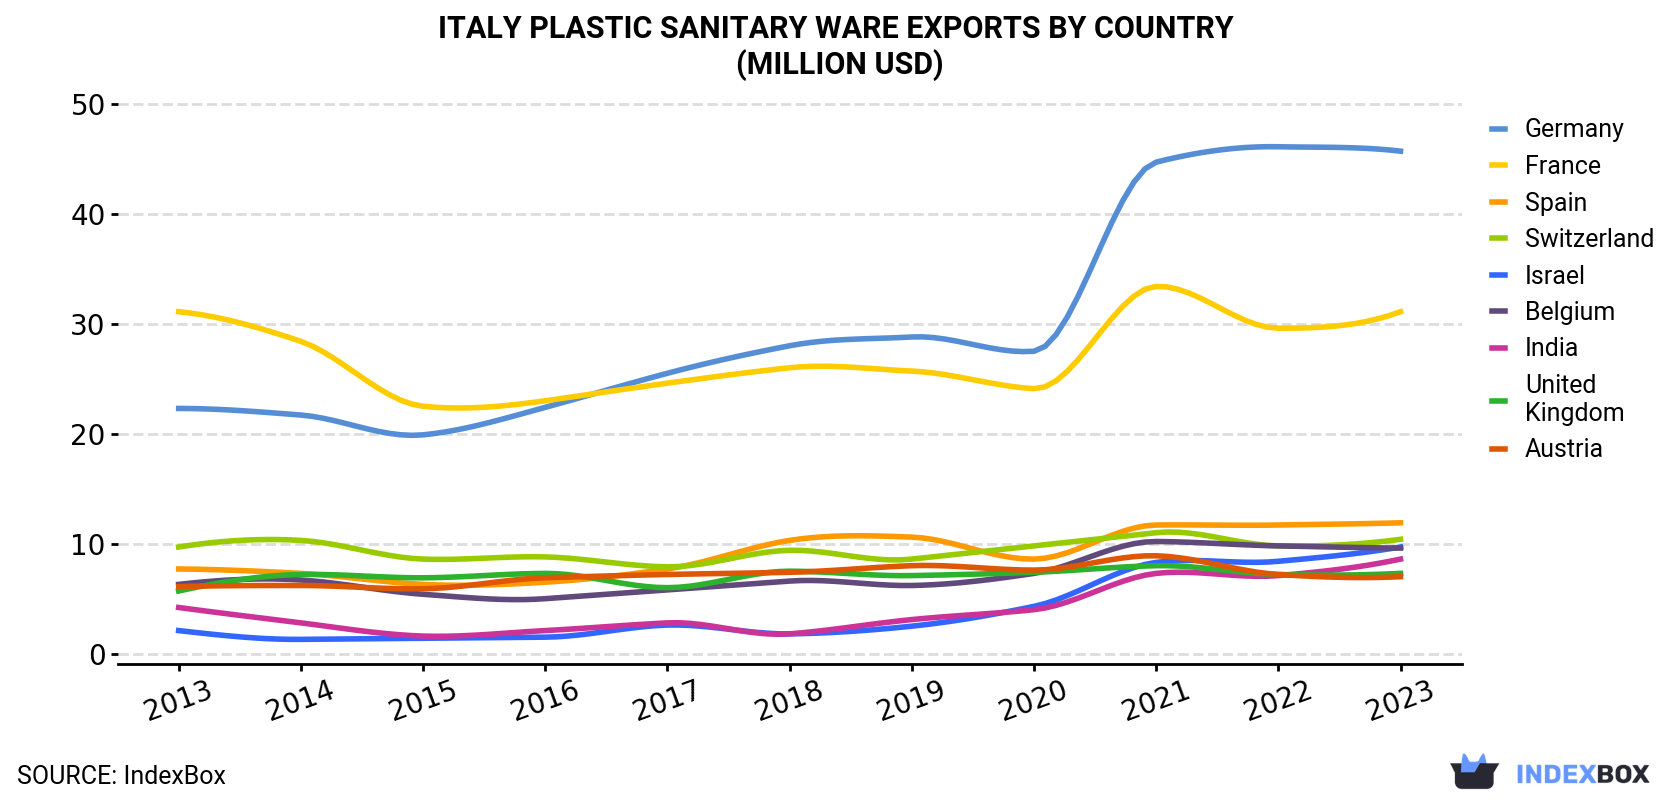 Italy Plastic Sanitary Ware Exports By Country (Million USD)